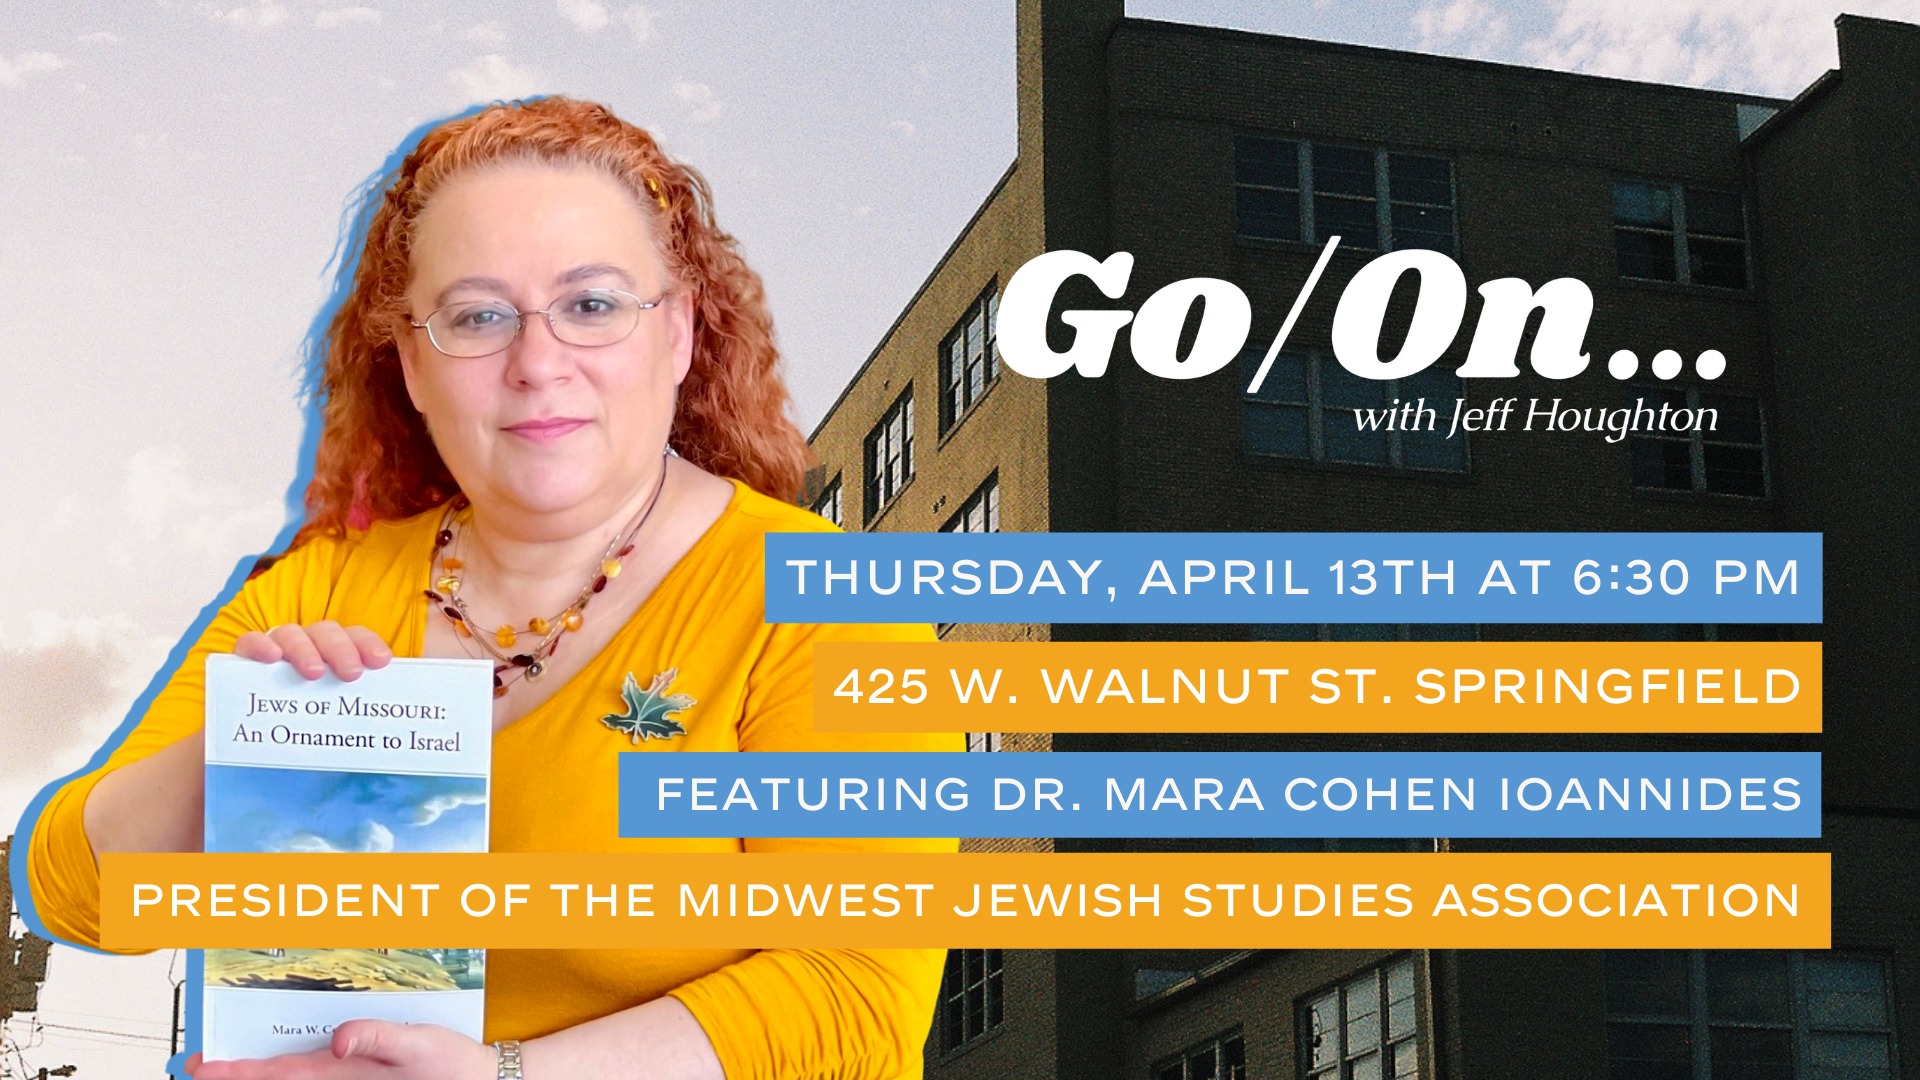 Go On, with Jeff Houghton Featuring Dr. Mara Cohen Ioannides